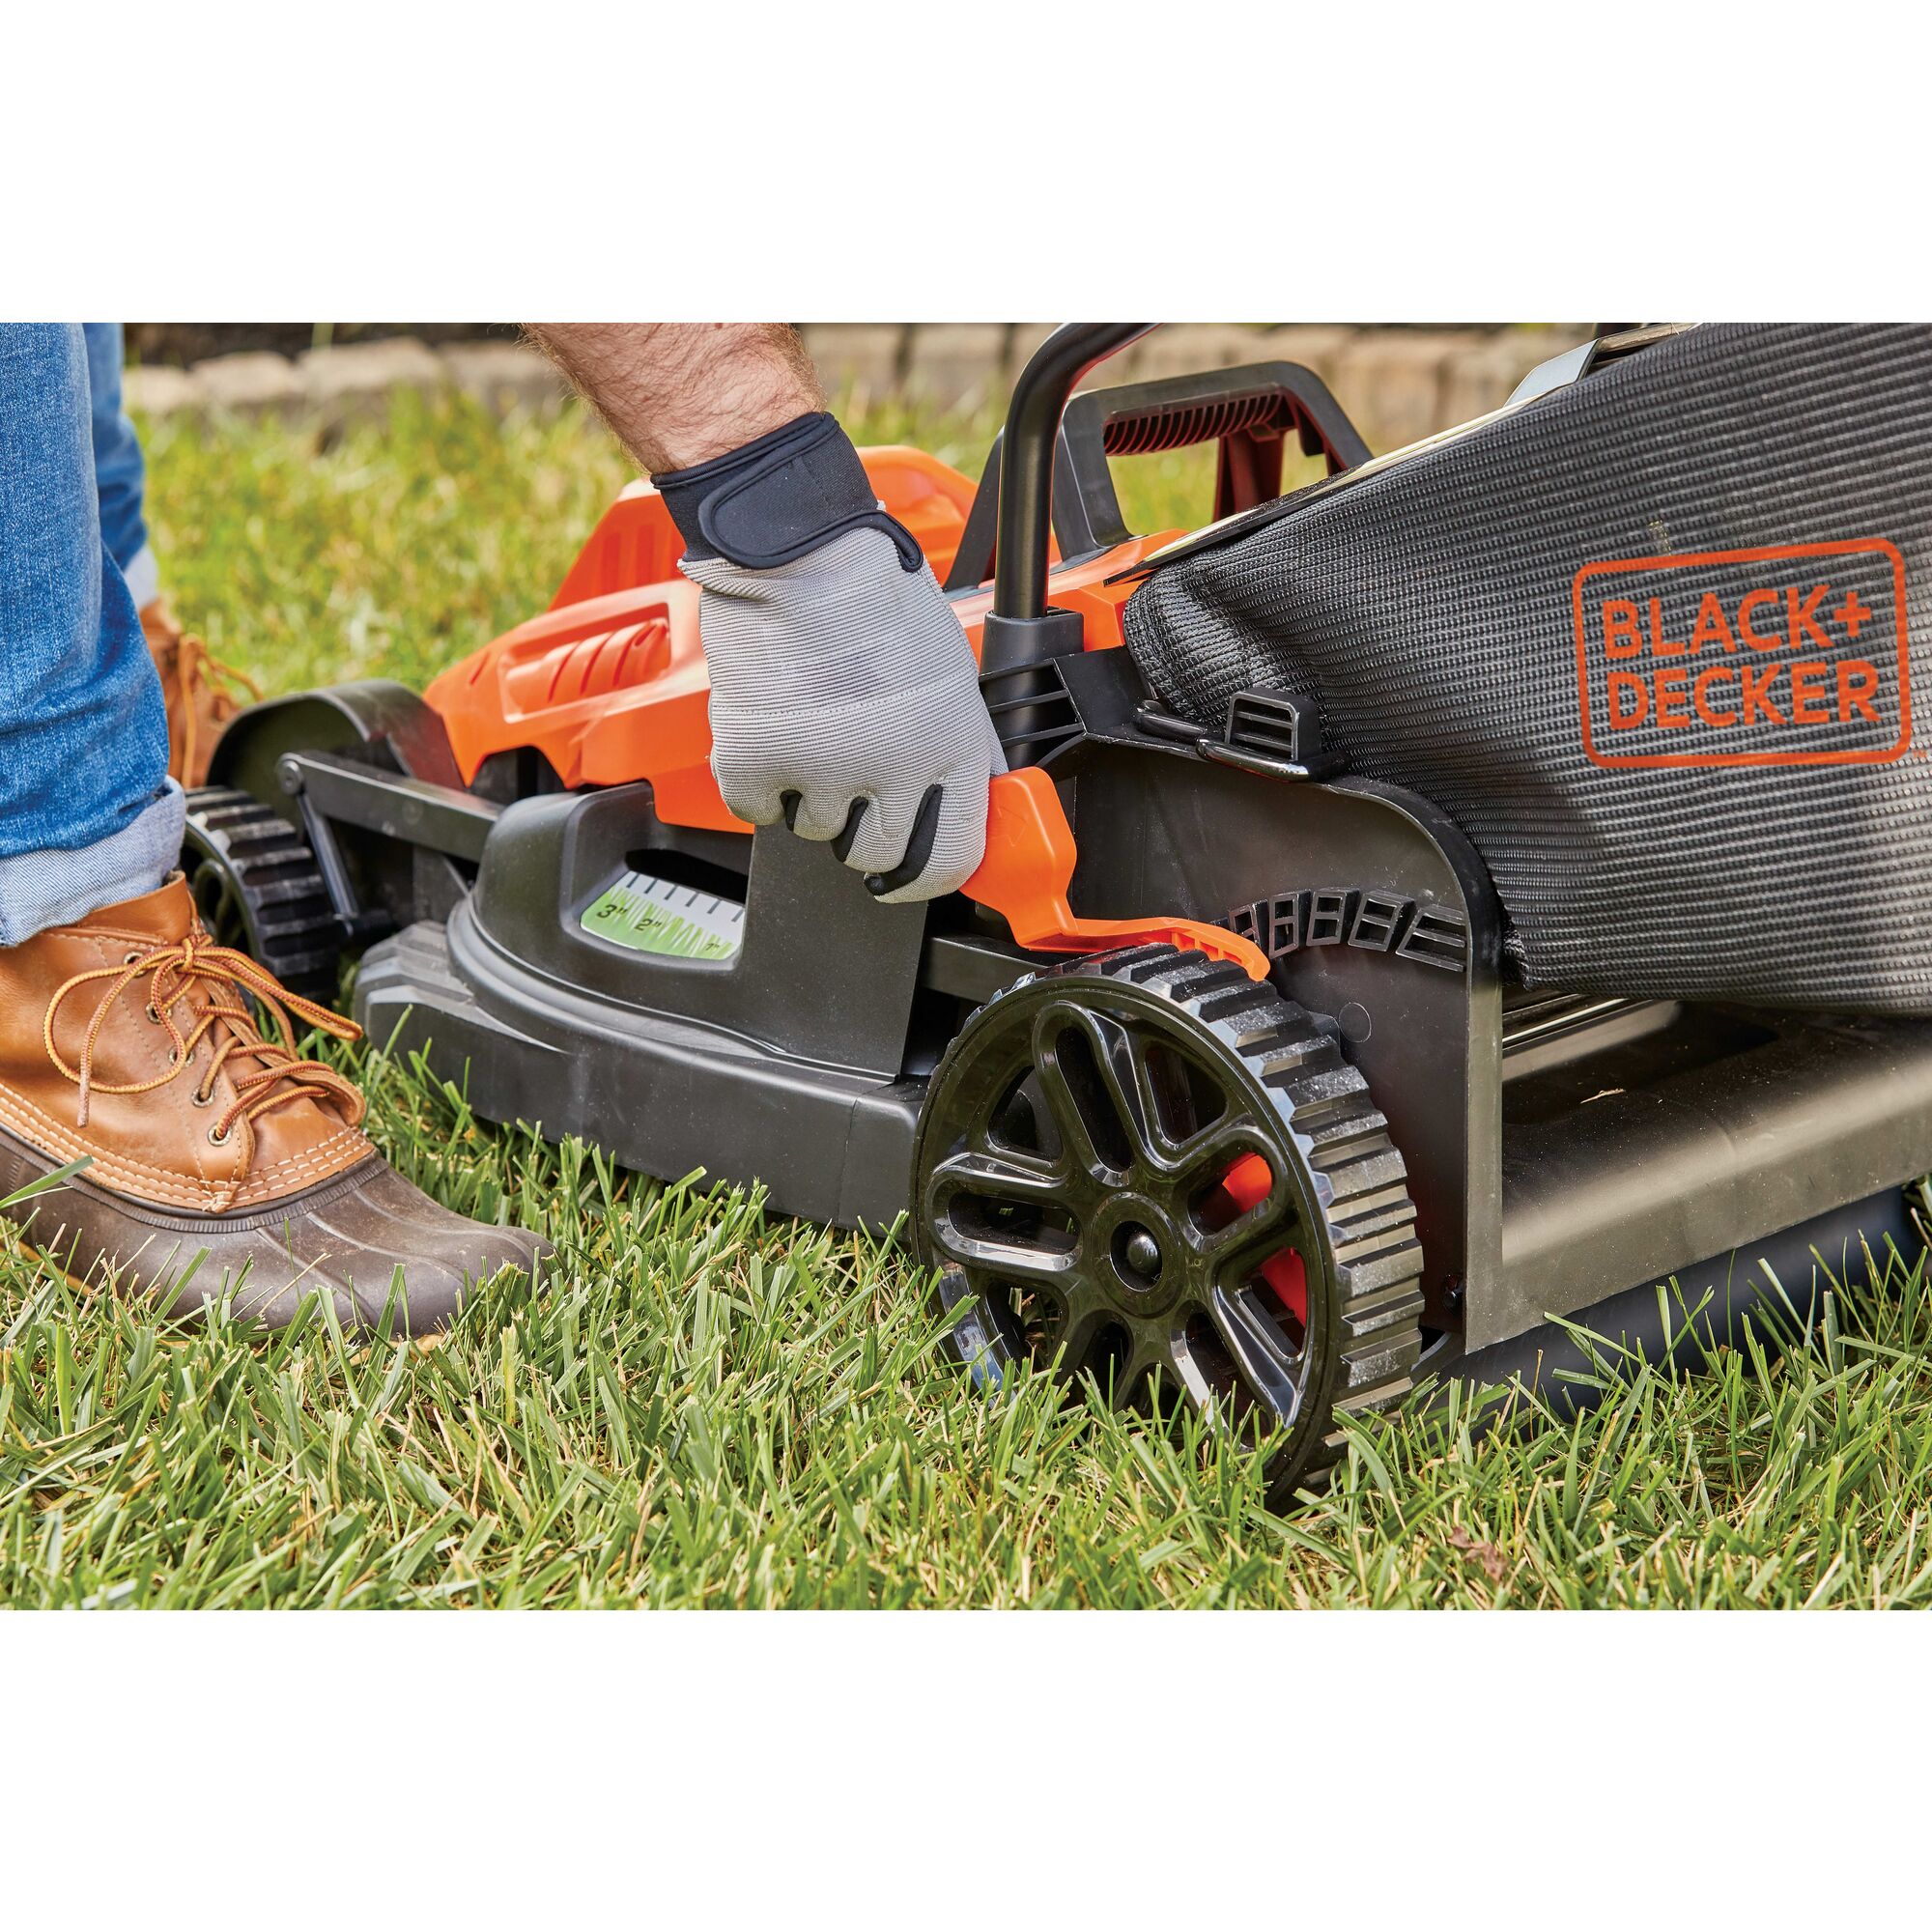 Rugged wheel feature of 12 Ampere 17 inch electric lawn mower with comfort grip handle.